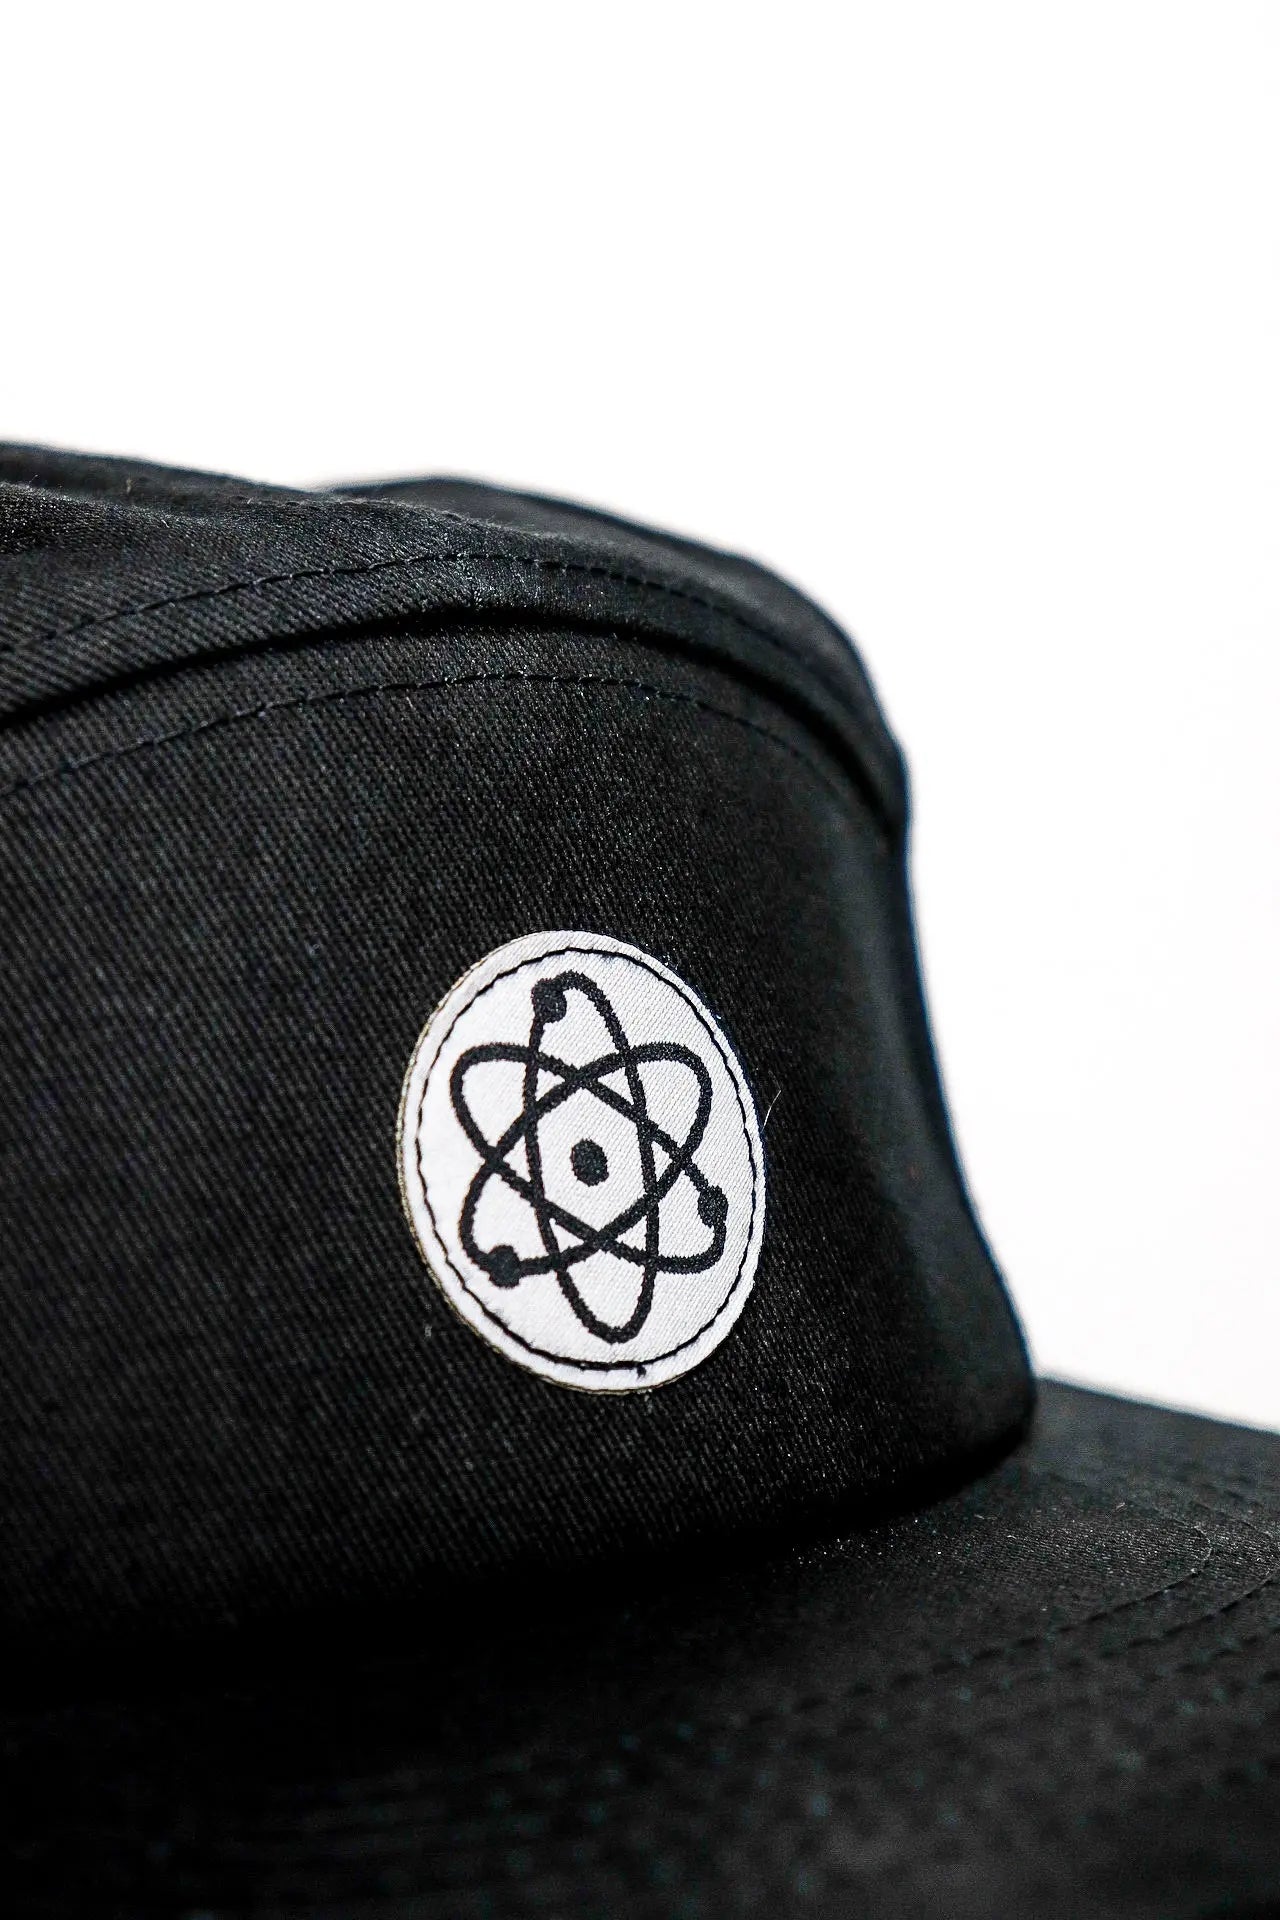 Stemcell Atomic Cap - Stemcell Science Shop